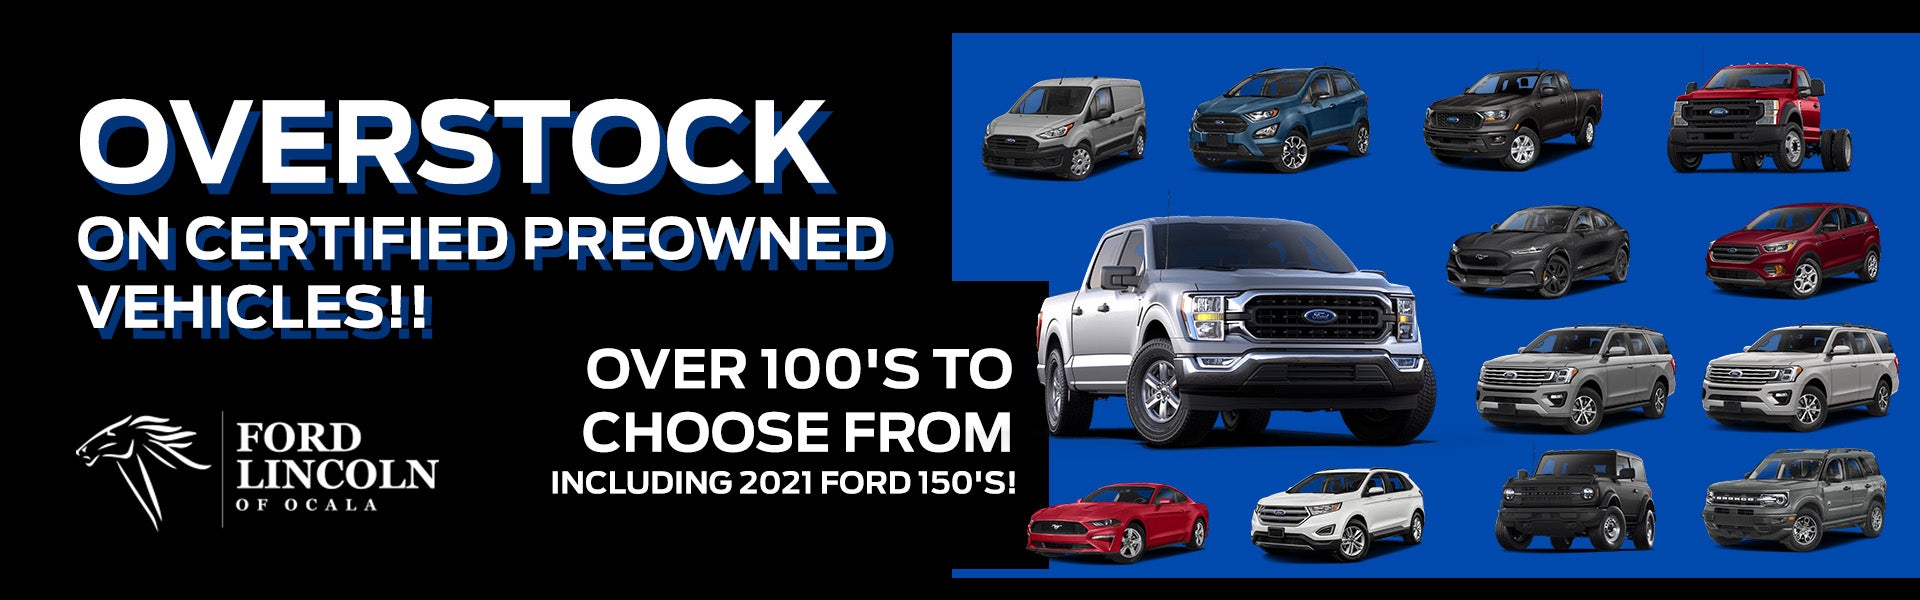 Certified Preowned Vehicles 